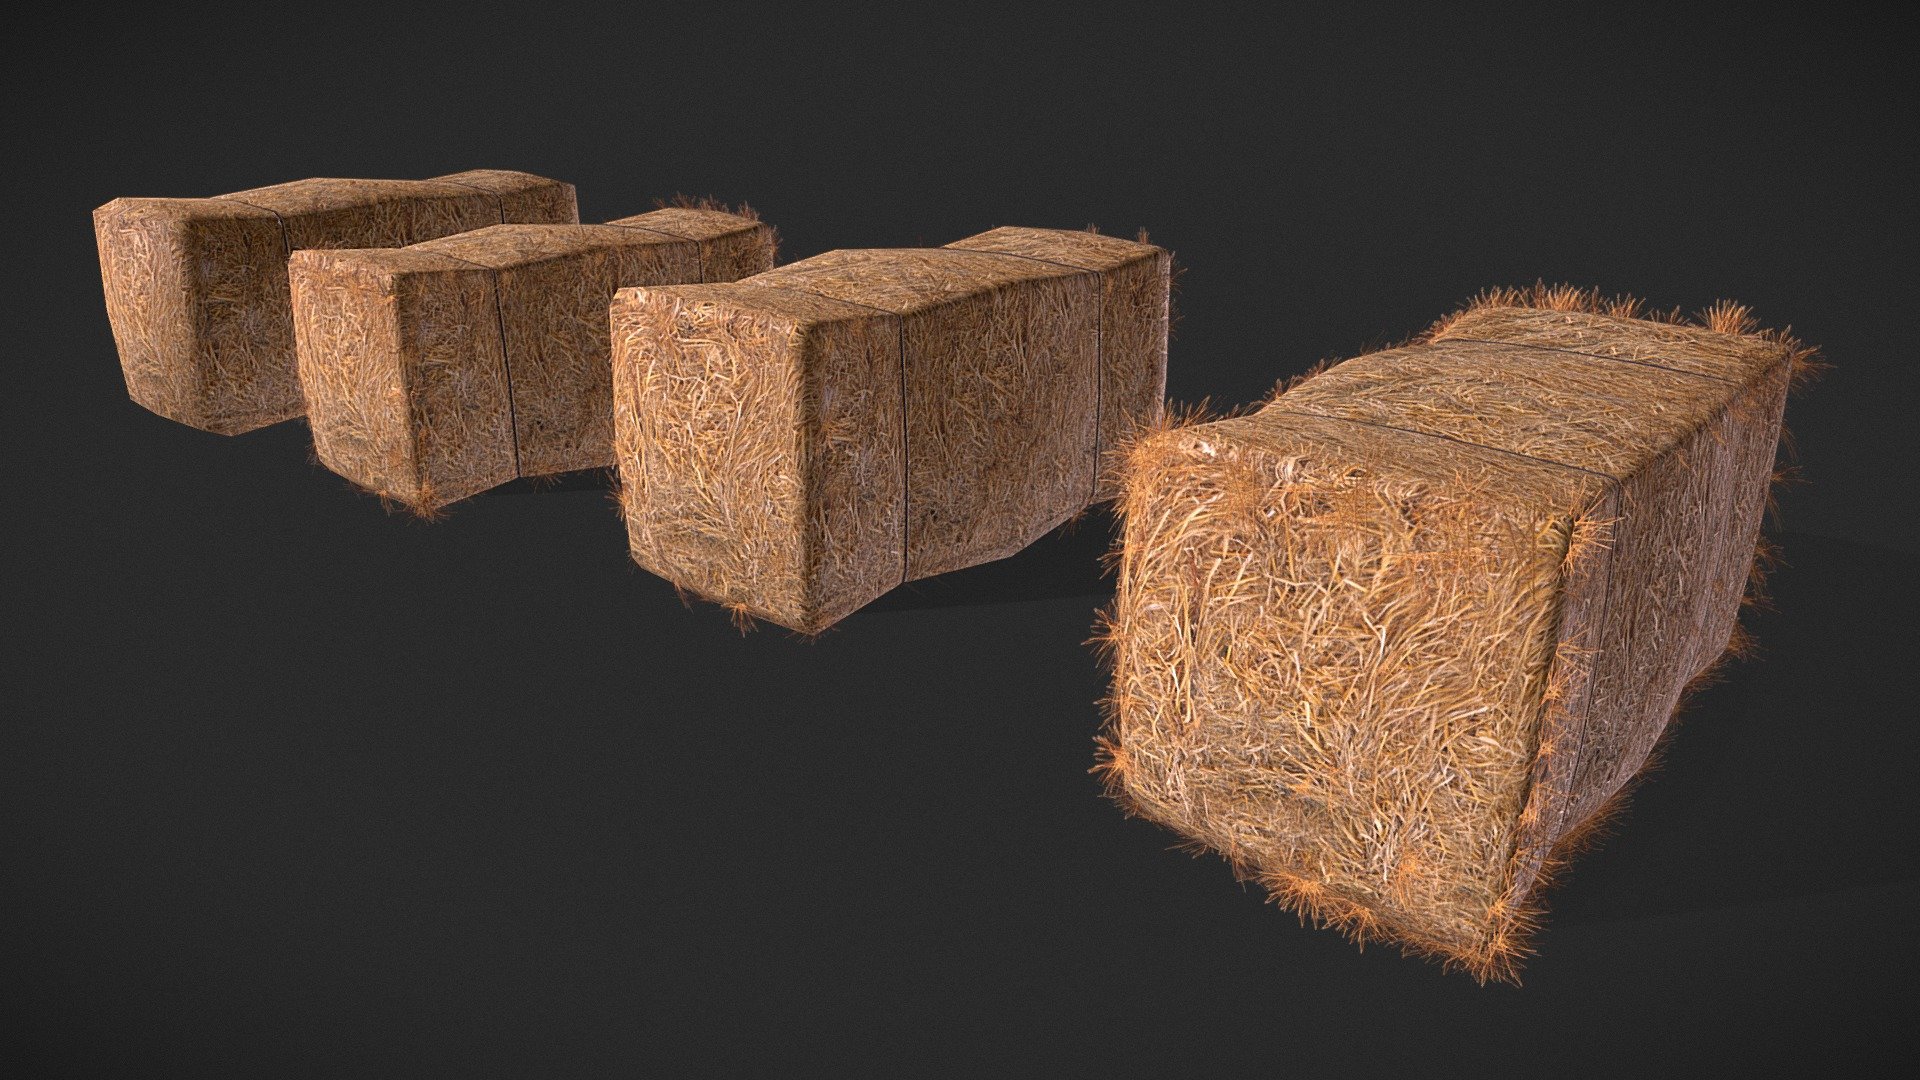 Hay Bale 3D Model

Includes 3 Lods and Main low Mesh. Only one Hay Mesh included. Preview Picture shows use of Hay with only half visable for shorter stacks. Scaled to real world scale.

LODs Hay_Bale_LOD0 Verts: 102 Polys: 104 Hay_Bale_LOD1 Verts: 442 Polys: 254 Hay_Bale_LOD2 Verts: 962 Polys: 384 Hay_Bale_LOD03 Verts: 2114 Polys: 1104

PBR Texture 2048x2048

Maps Included: BaseColor Normal Height Roughness Metallic Opacity

All Preview Renders were done in Marmoset Toolbag 3.06 From the Creators at Get Dead Entertainment Please Like, Follow, and Rate :) - Hay Bale Set - Buy Royalty Free 3D model by GetDeadEntertainment 3d model